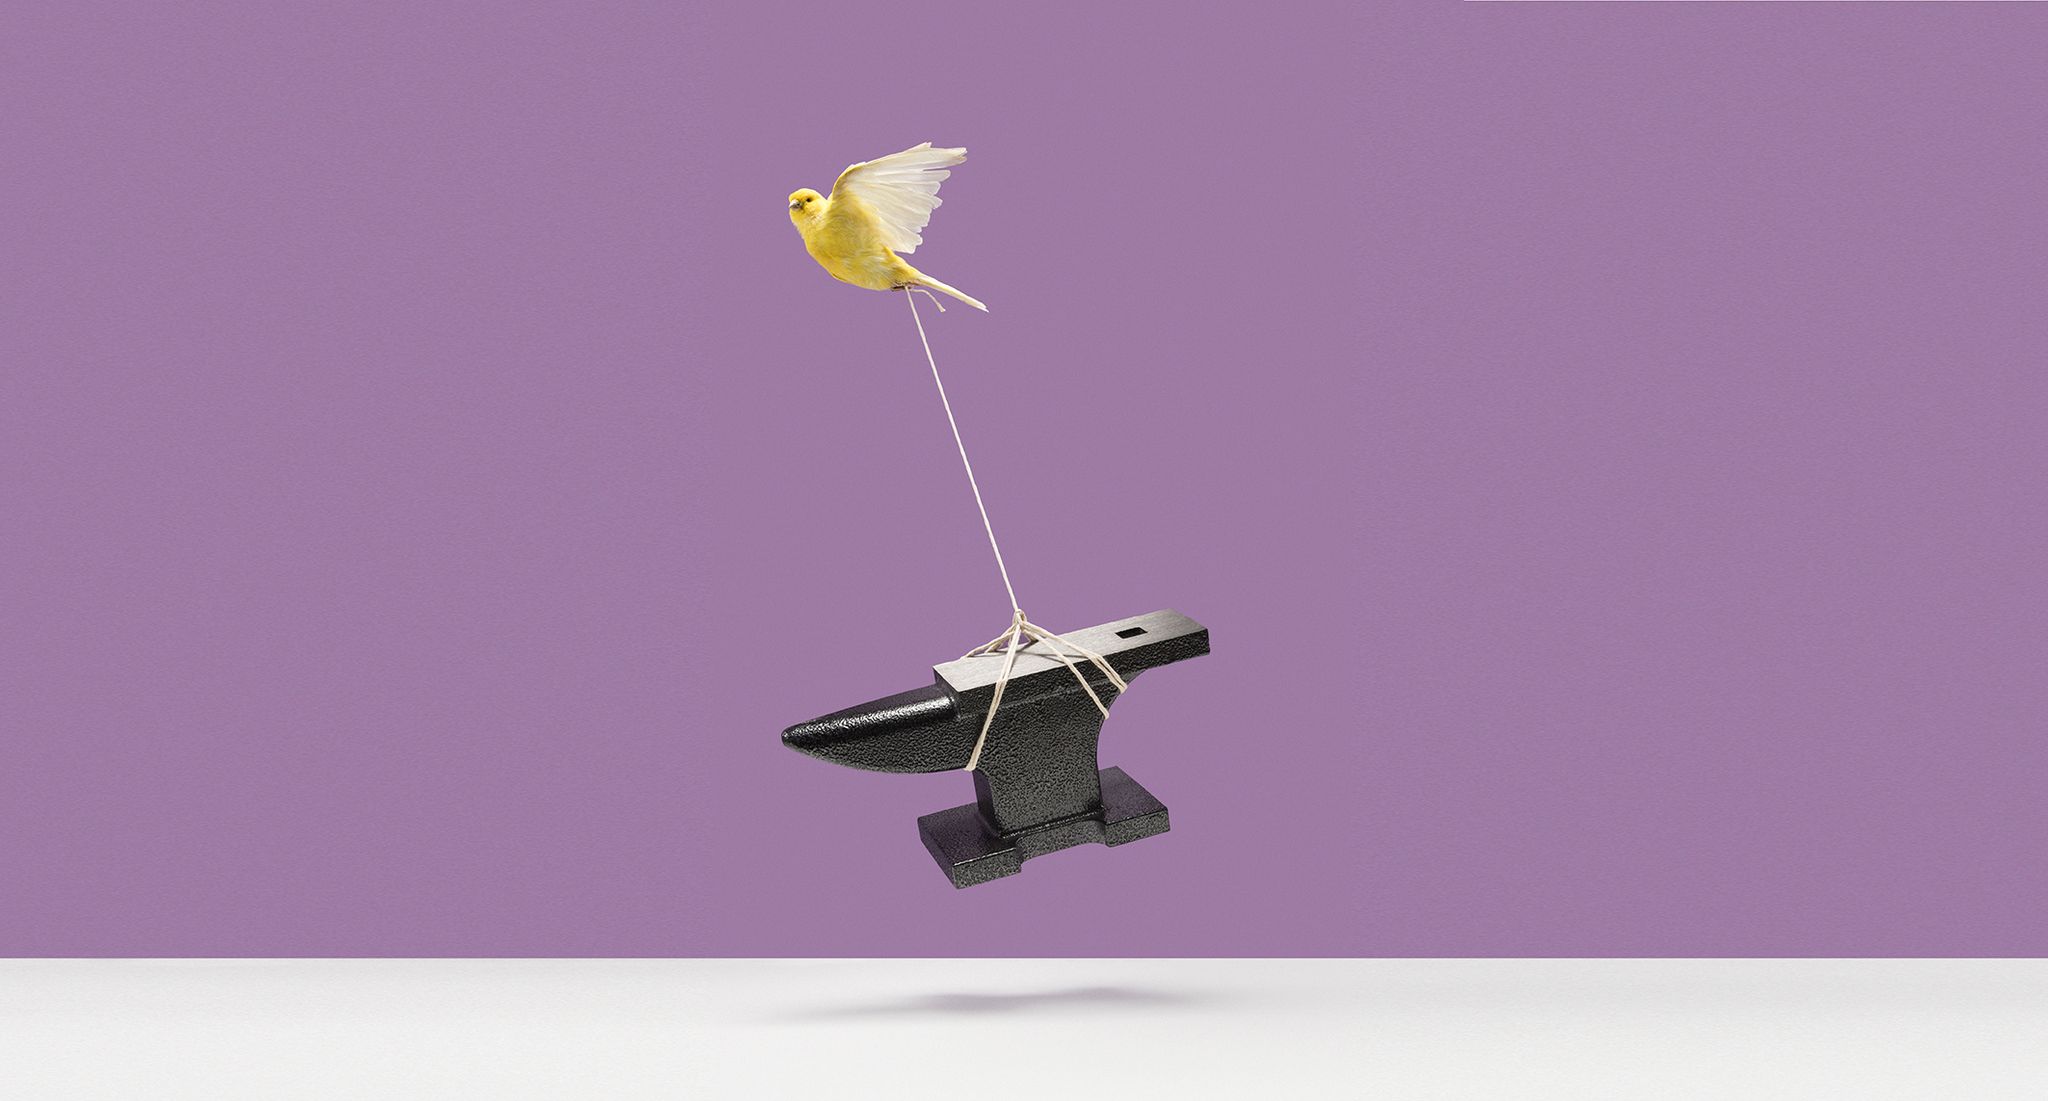 yellow canary lifting a heavy iron anvil off of white surface with string, purple background